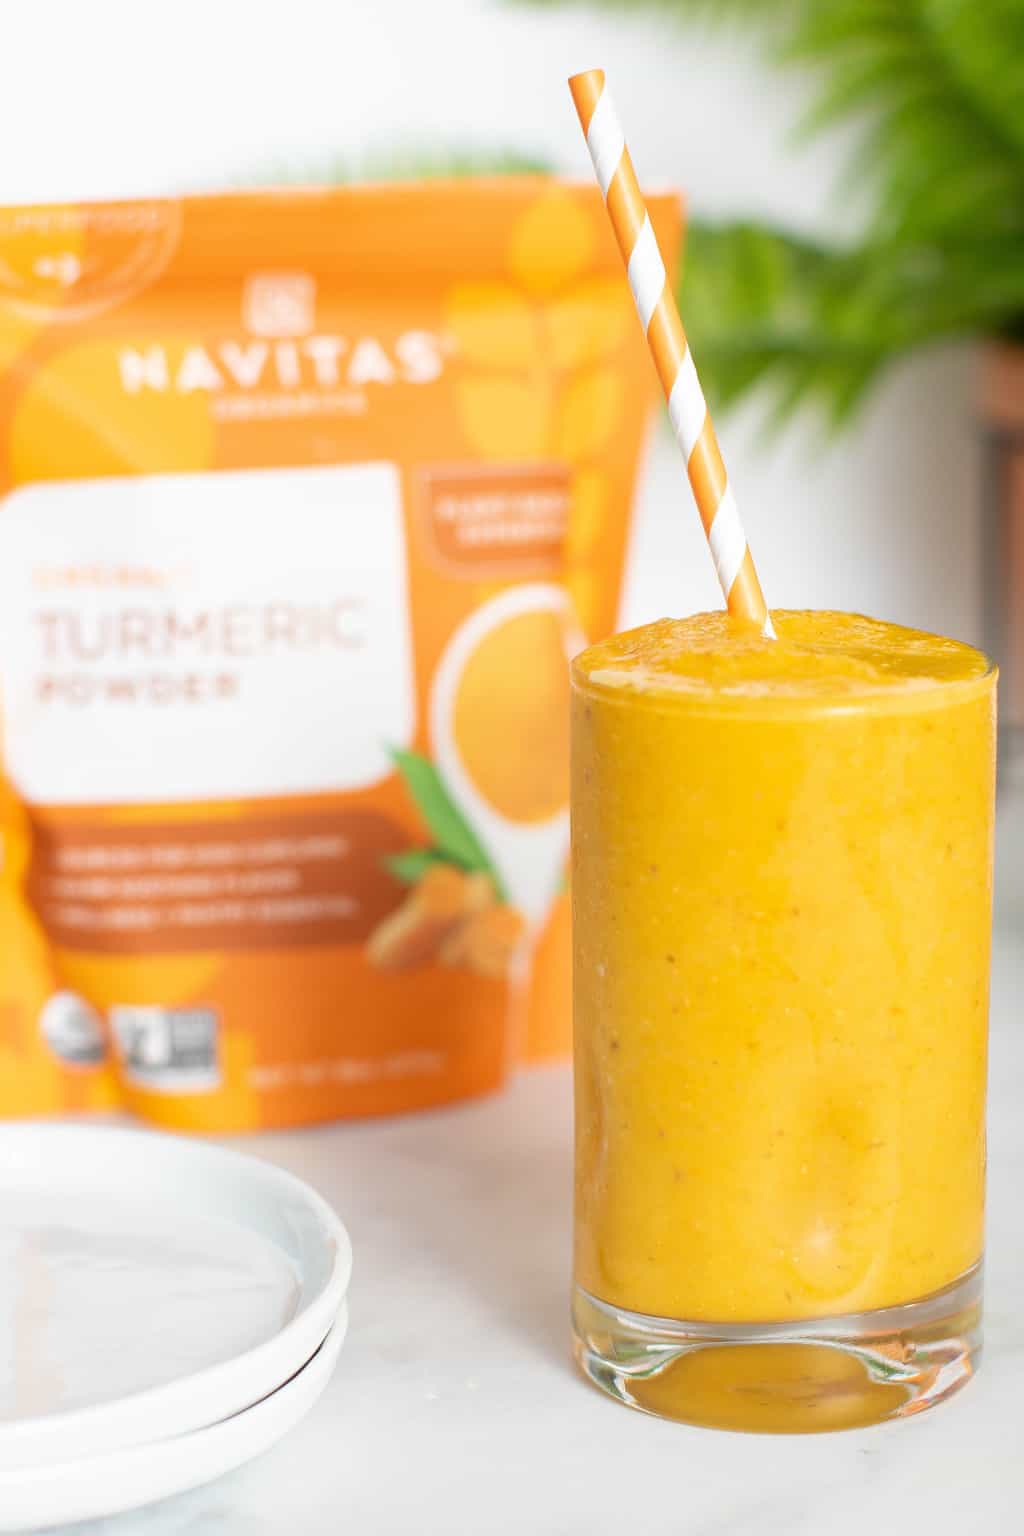 Glass of Turmeric \'Wake Up\' Smoothie in front of a bag of Navitas turmeric powder